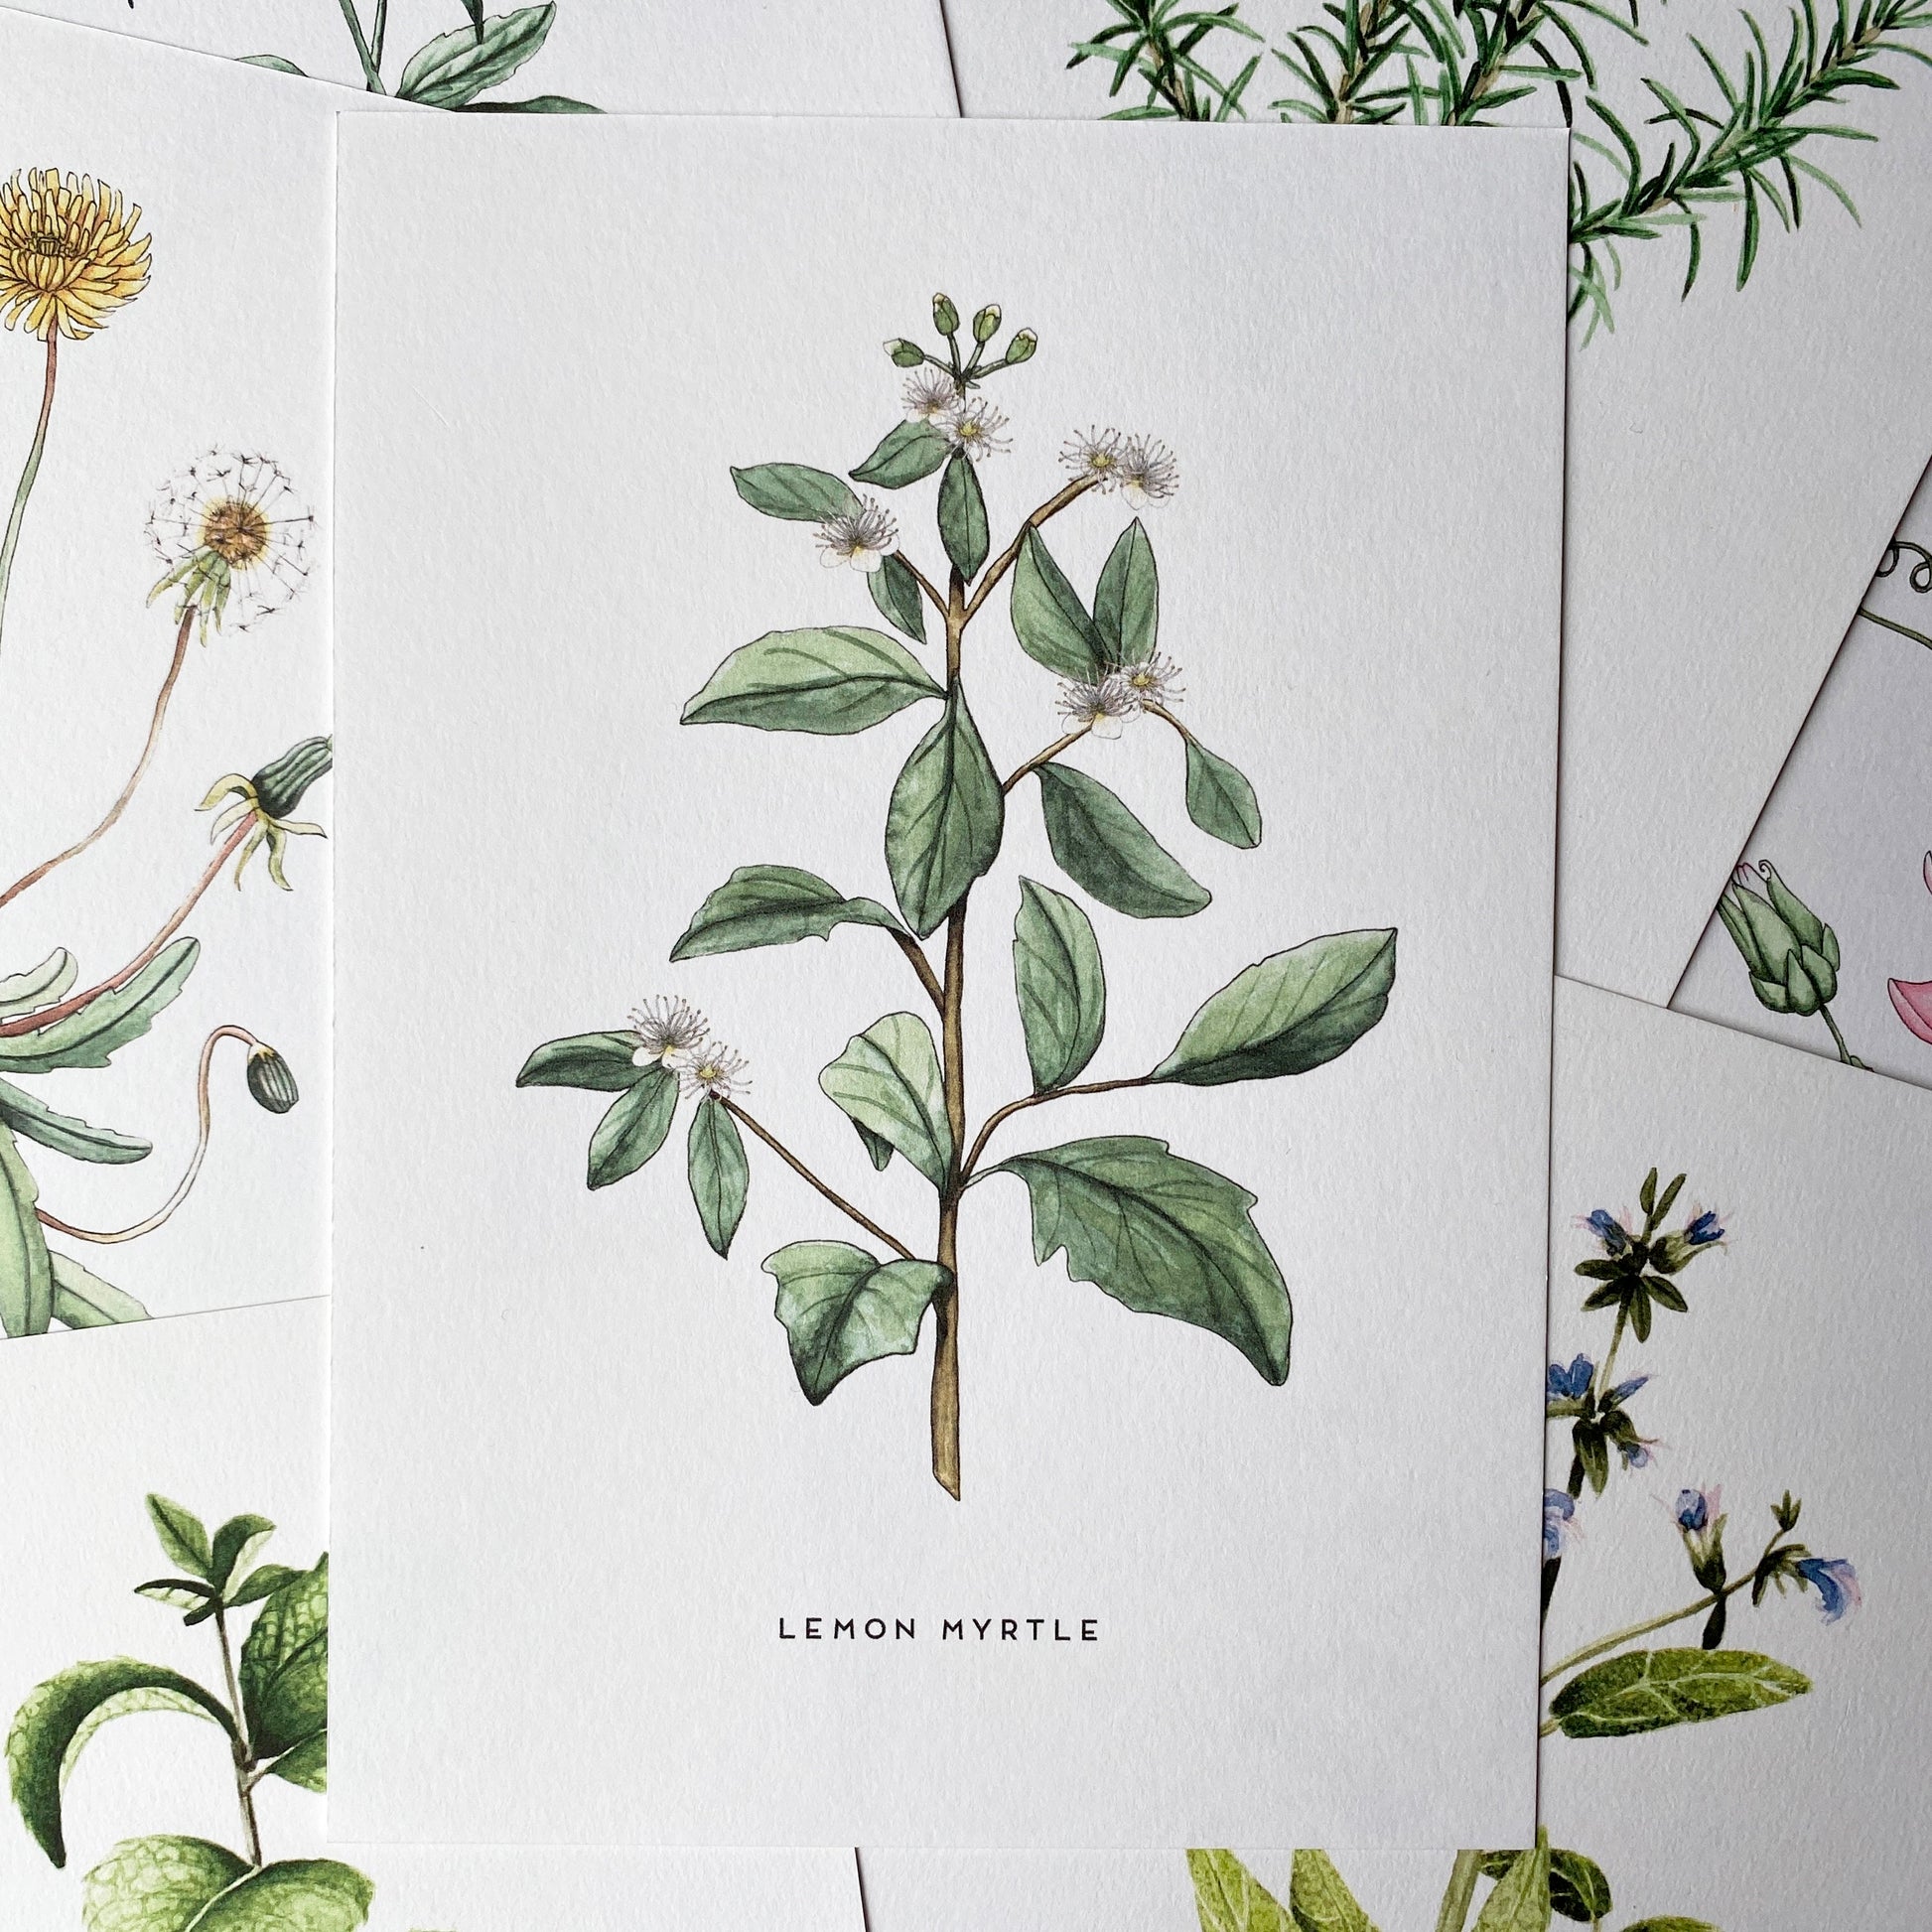 Watercolour print of the herb lemon myrtle, delicate white flowers with dark green leaves. A5 print onto white textured paper